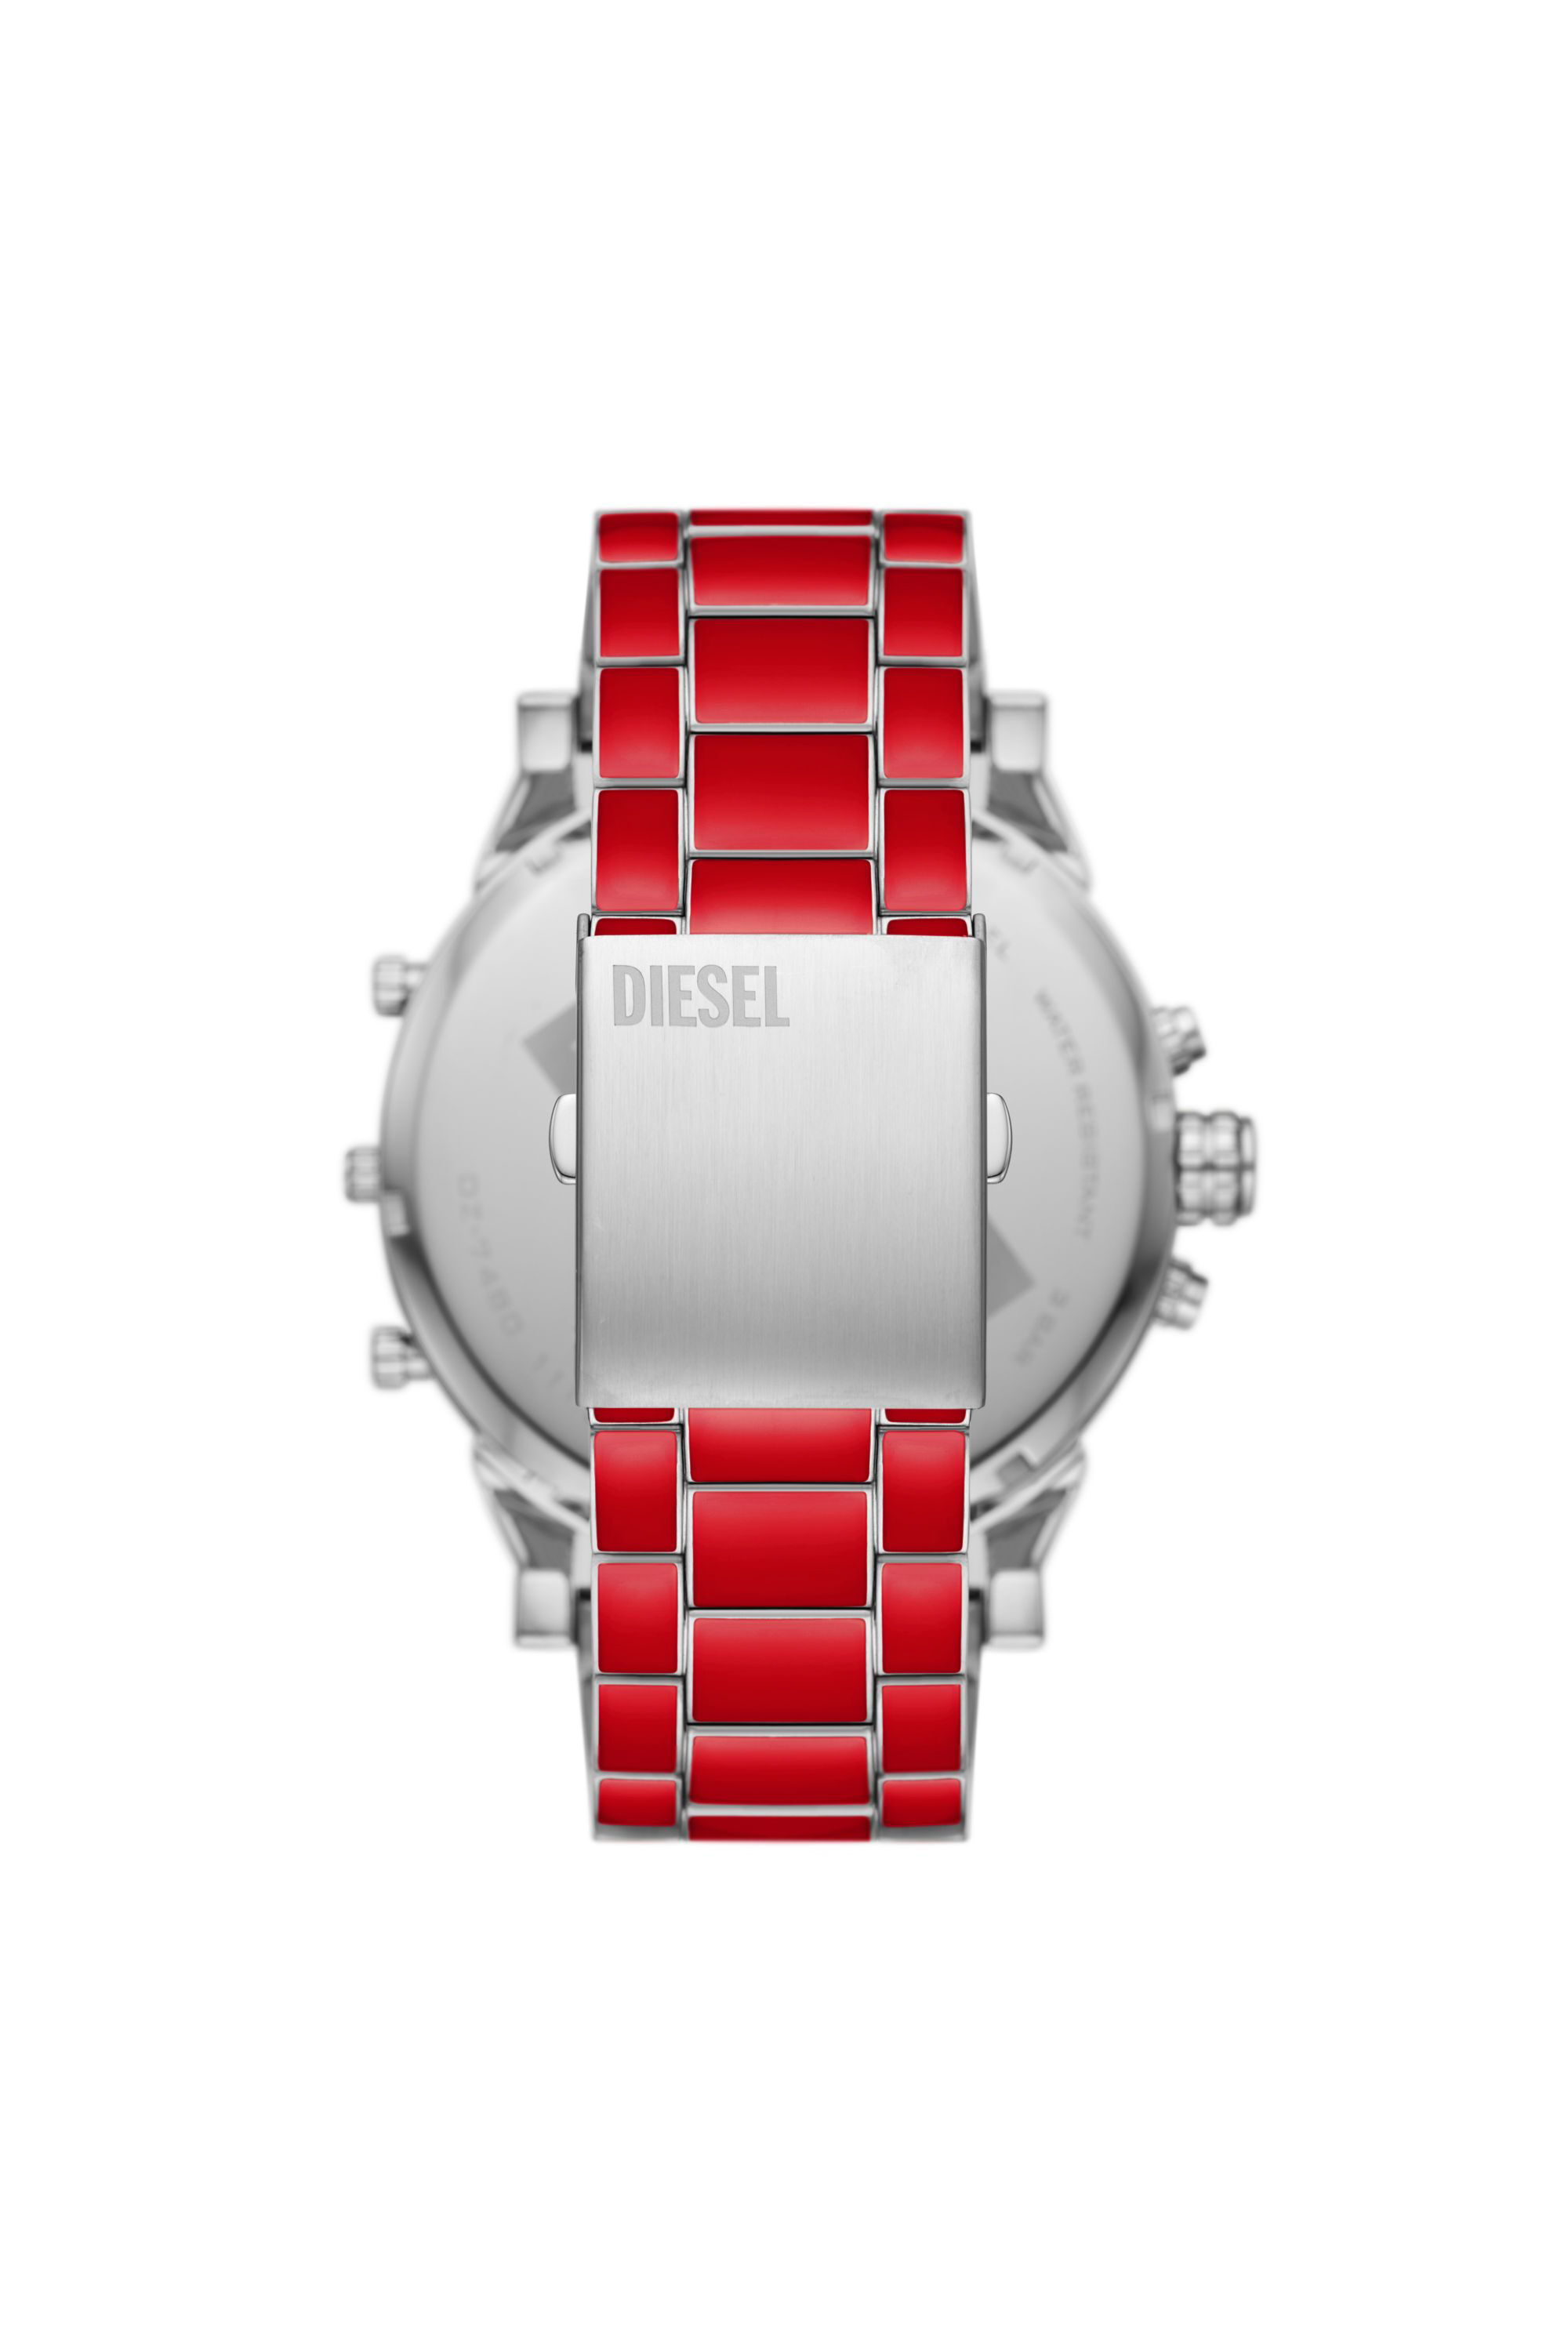 Diesel Men's Mr. Daddy 2.0 Chronograph Red Enamel and Stainless Steel Watch